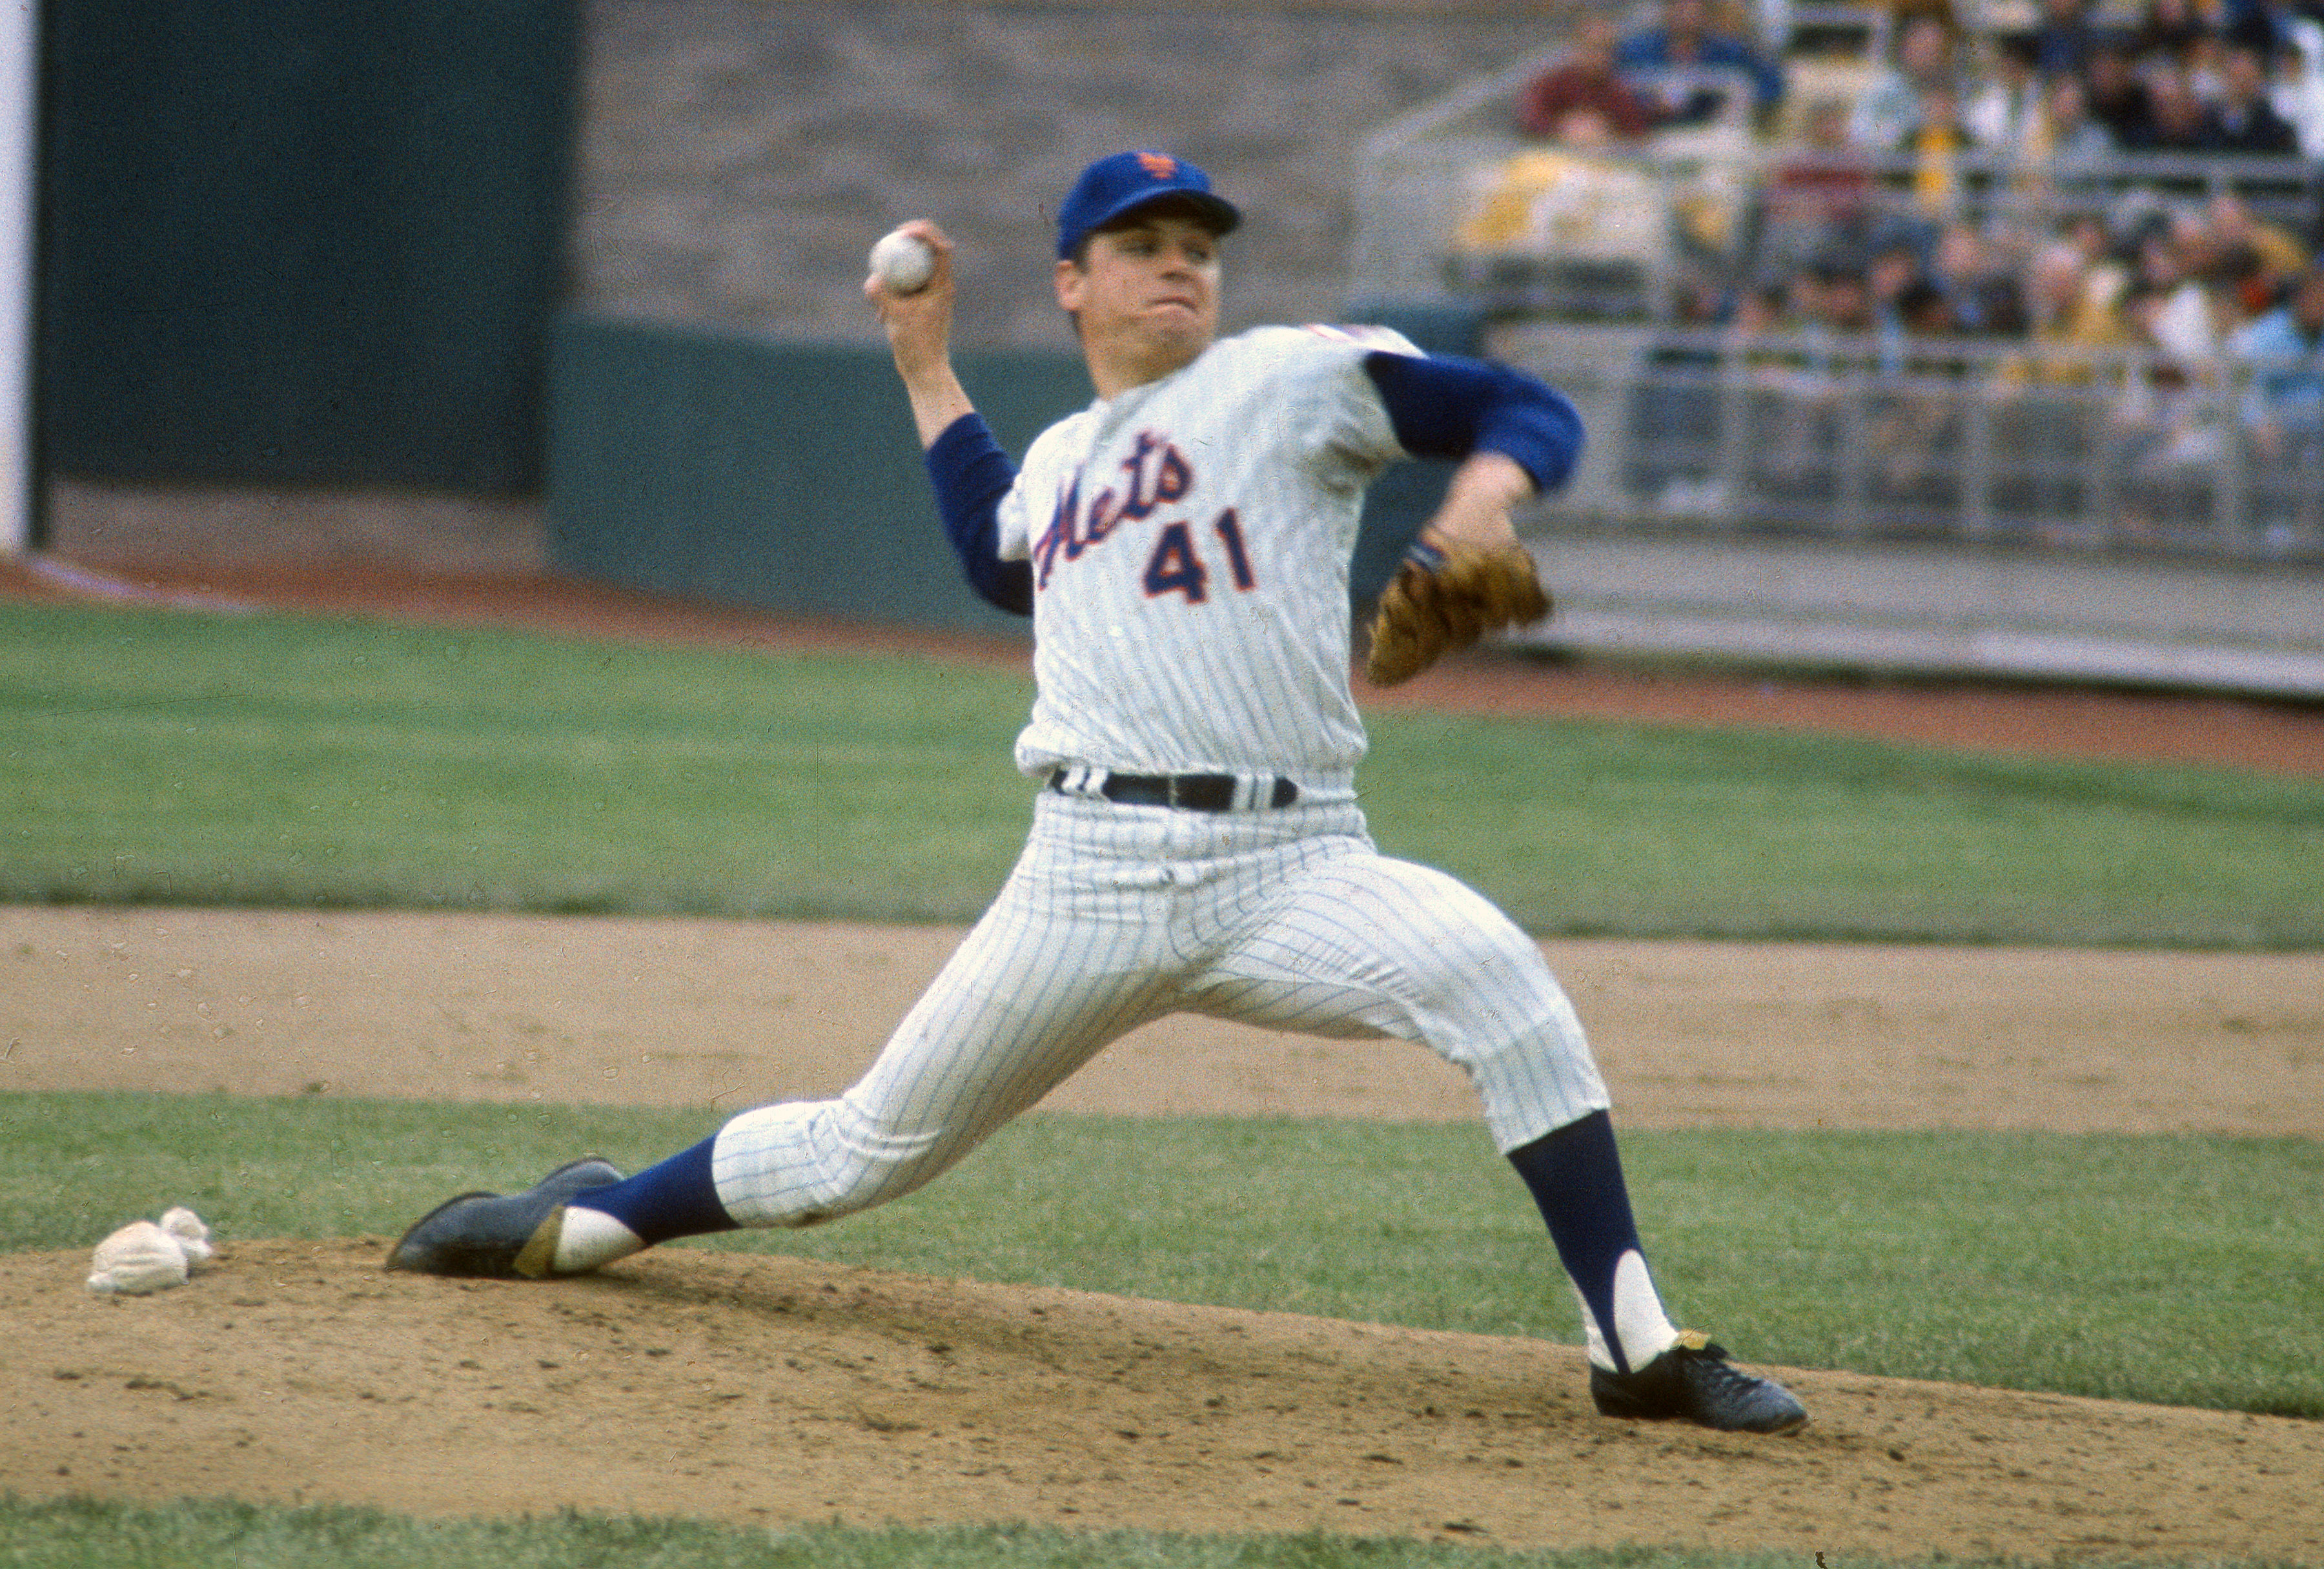 Remembering Mets' legend Tom Seaver, who died two years ago this